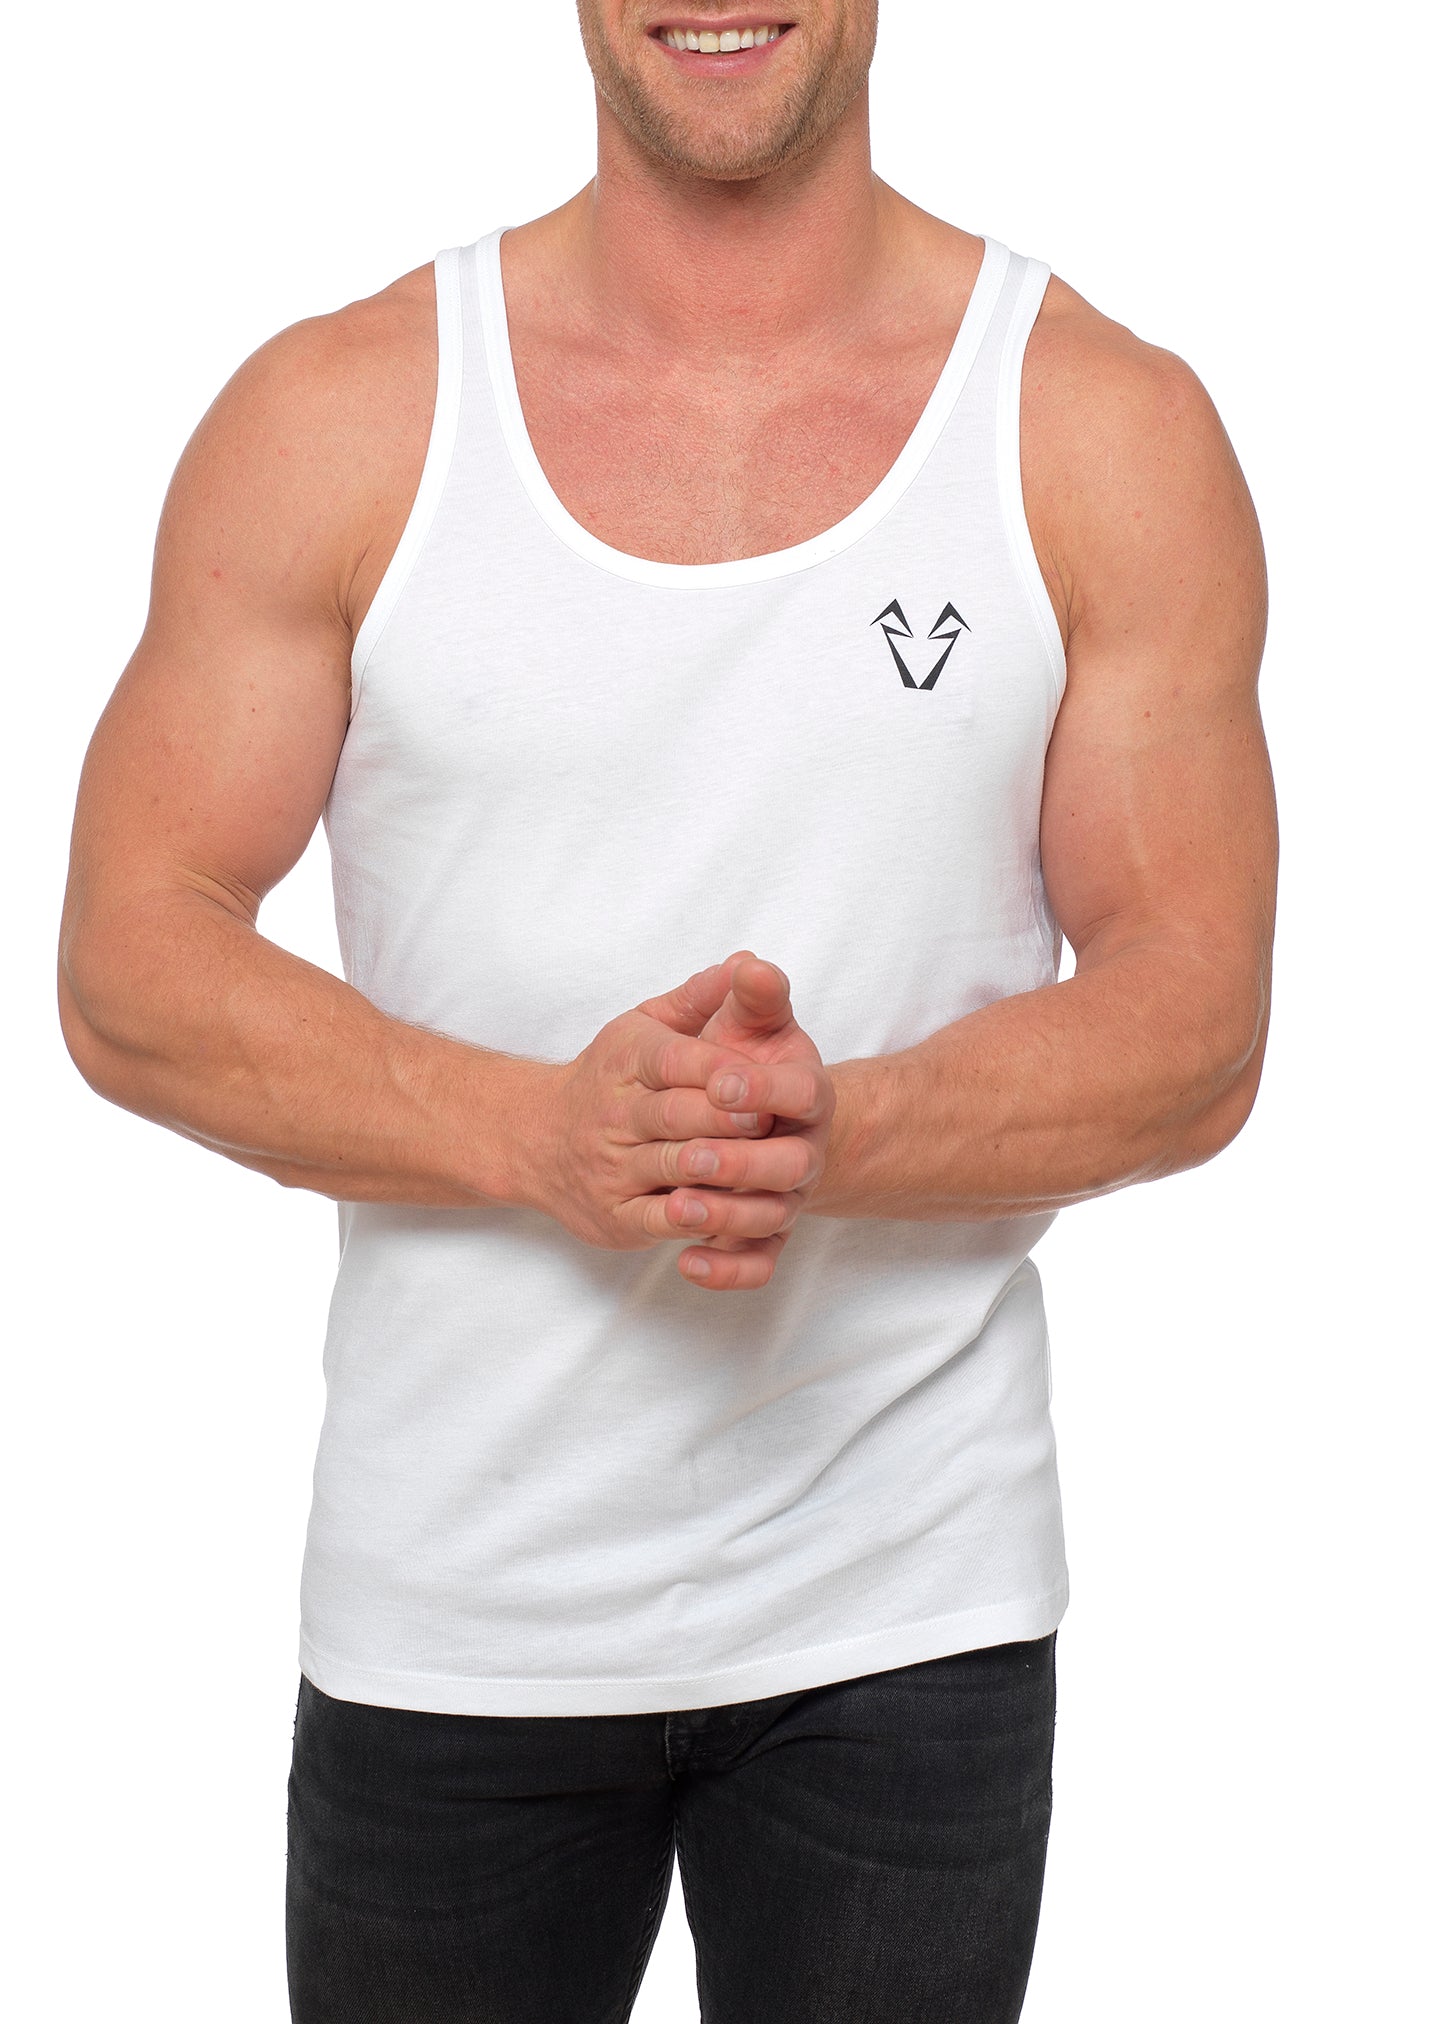 Muscle Fit White Vests